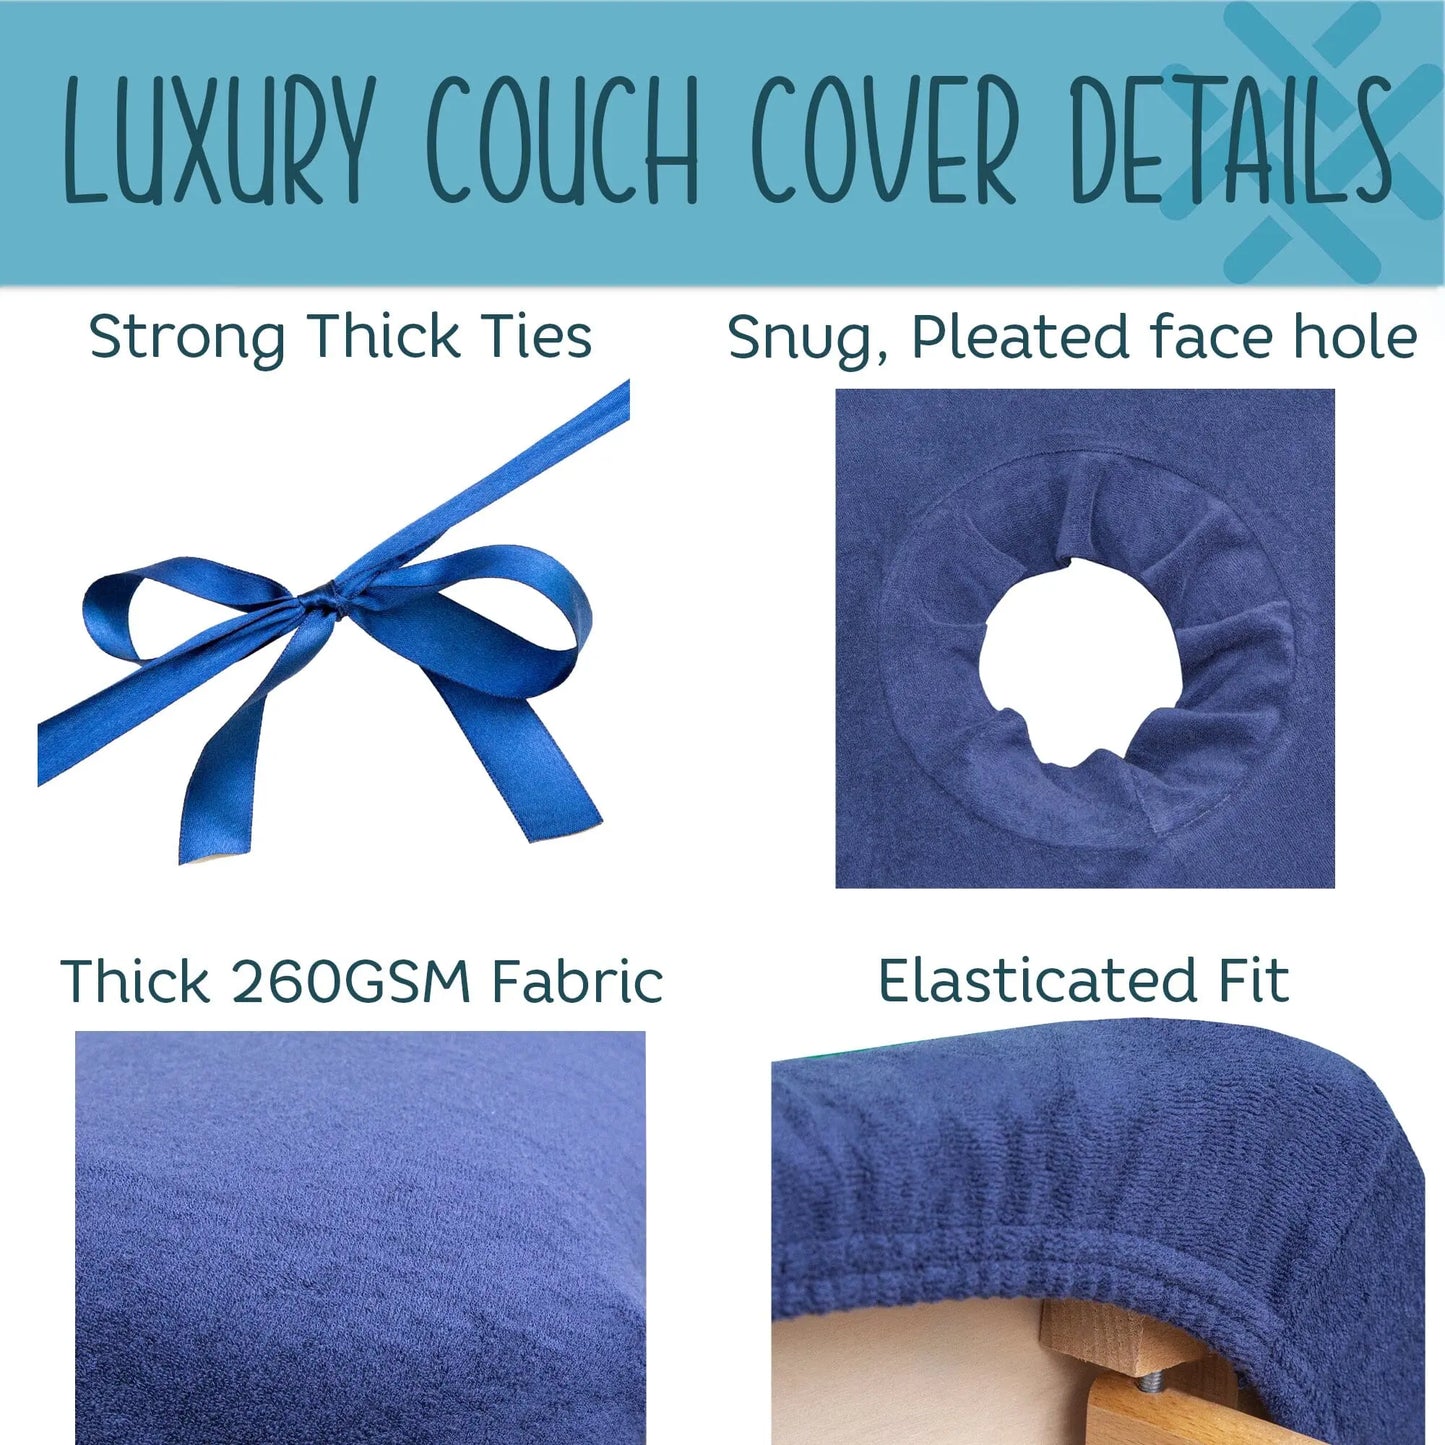 Infographic showing the benefit of luxury couch covers